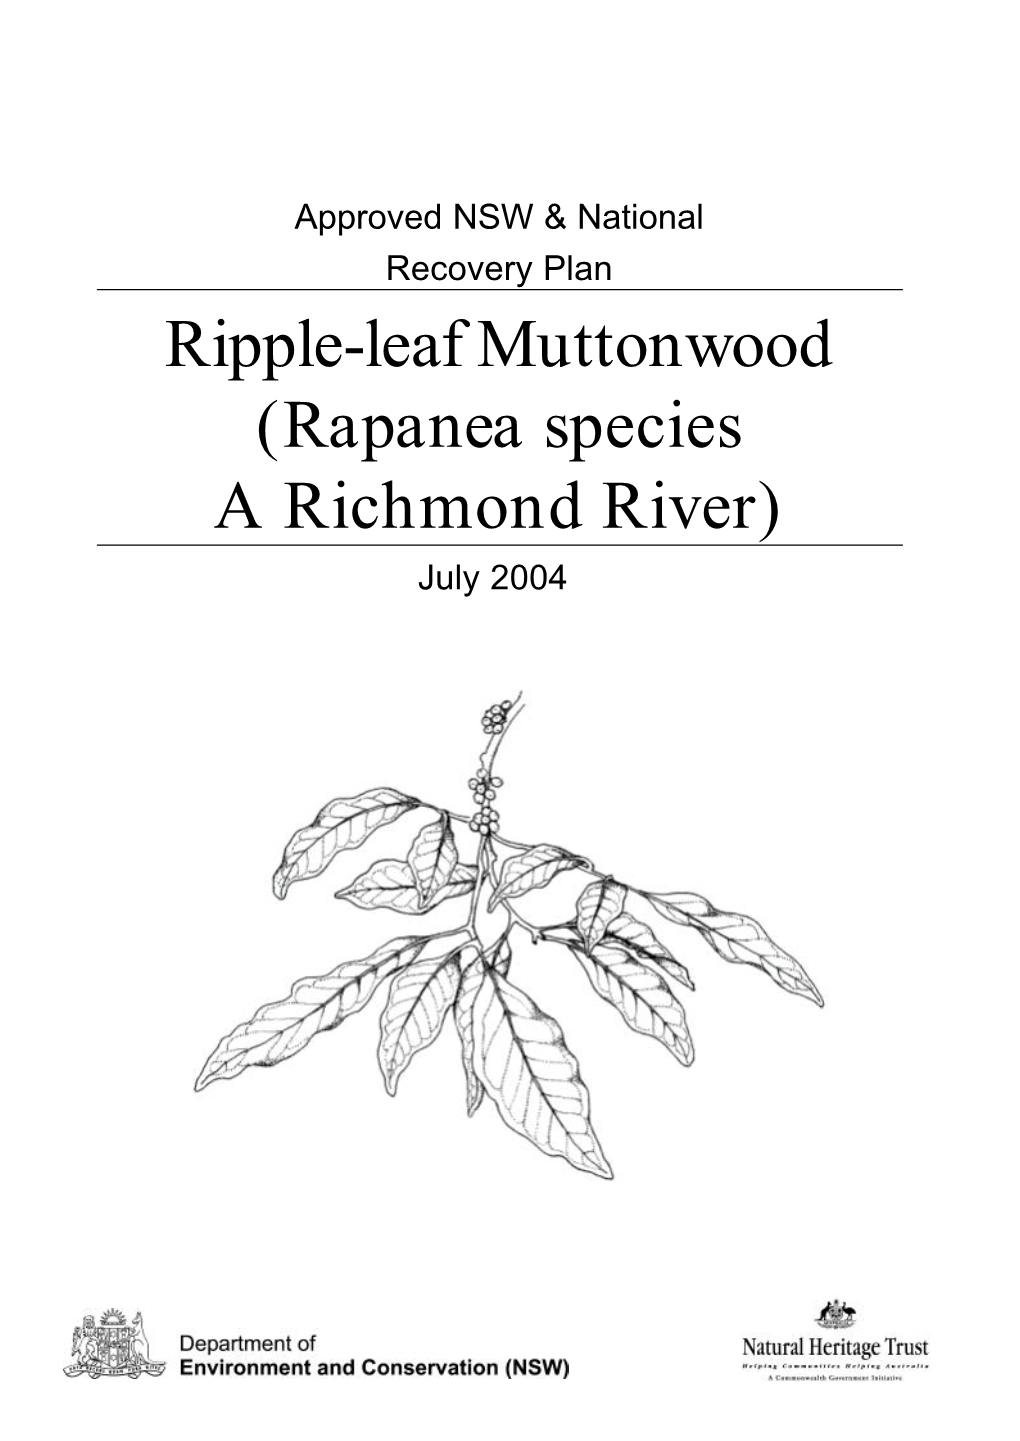 Ripple-Leaf Muttonwood (Rapanea Species a Richmond River) July 2004 © NSW Department of Environment and Conservation, 2004